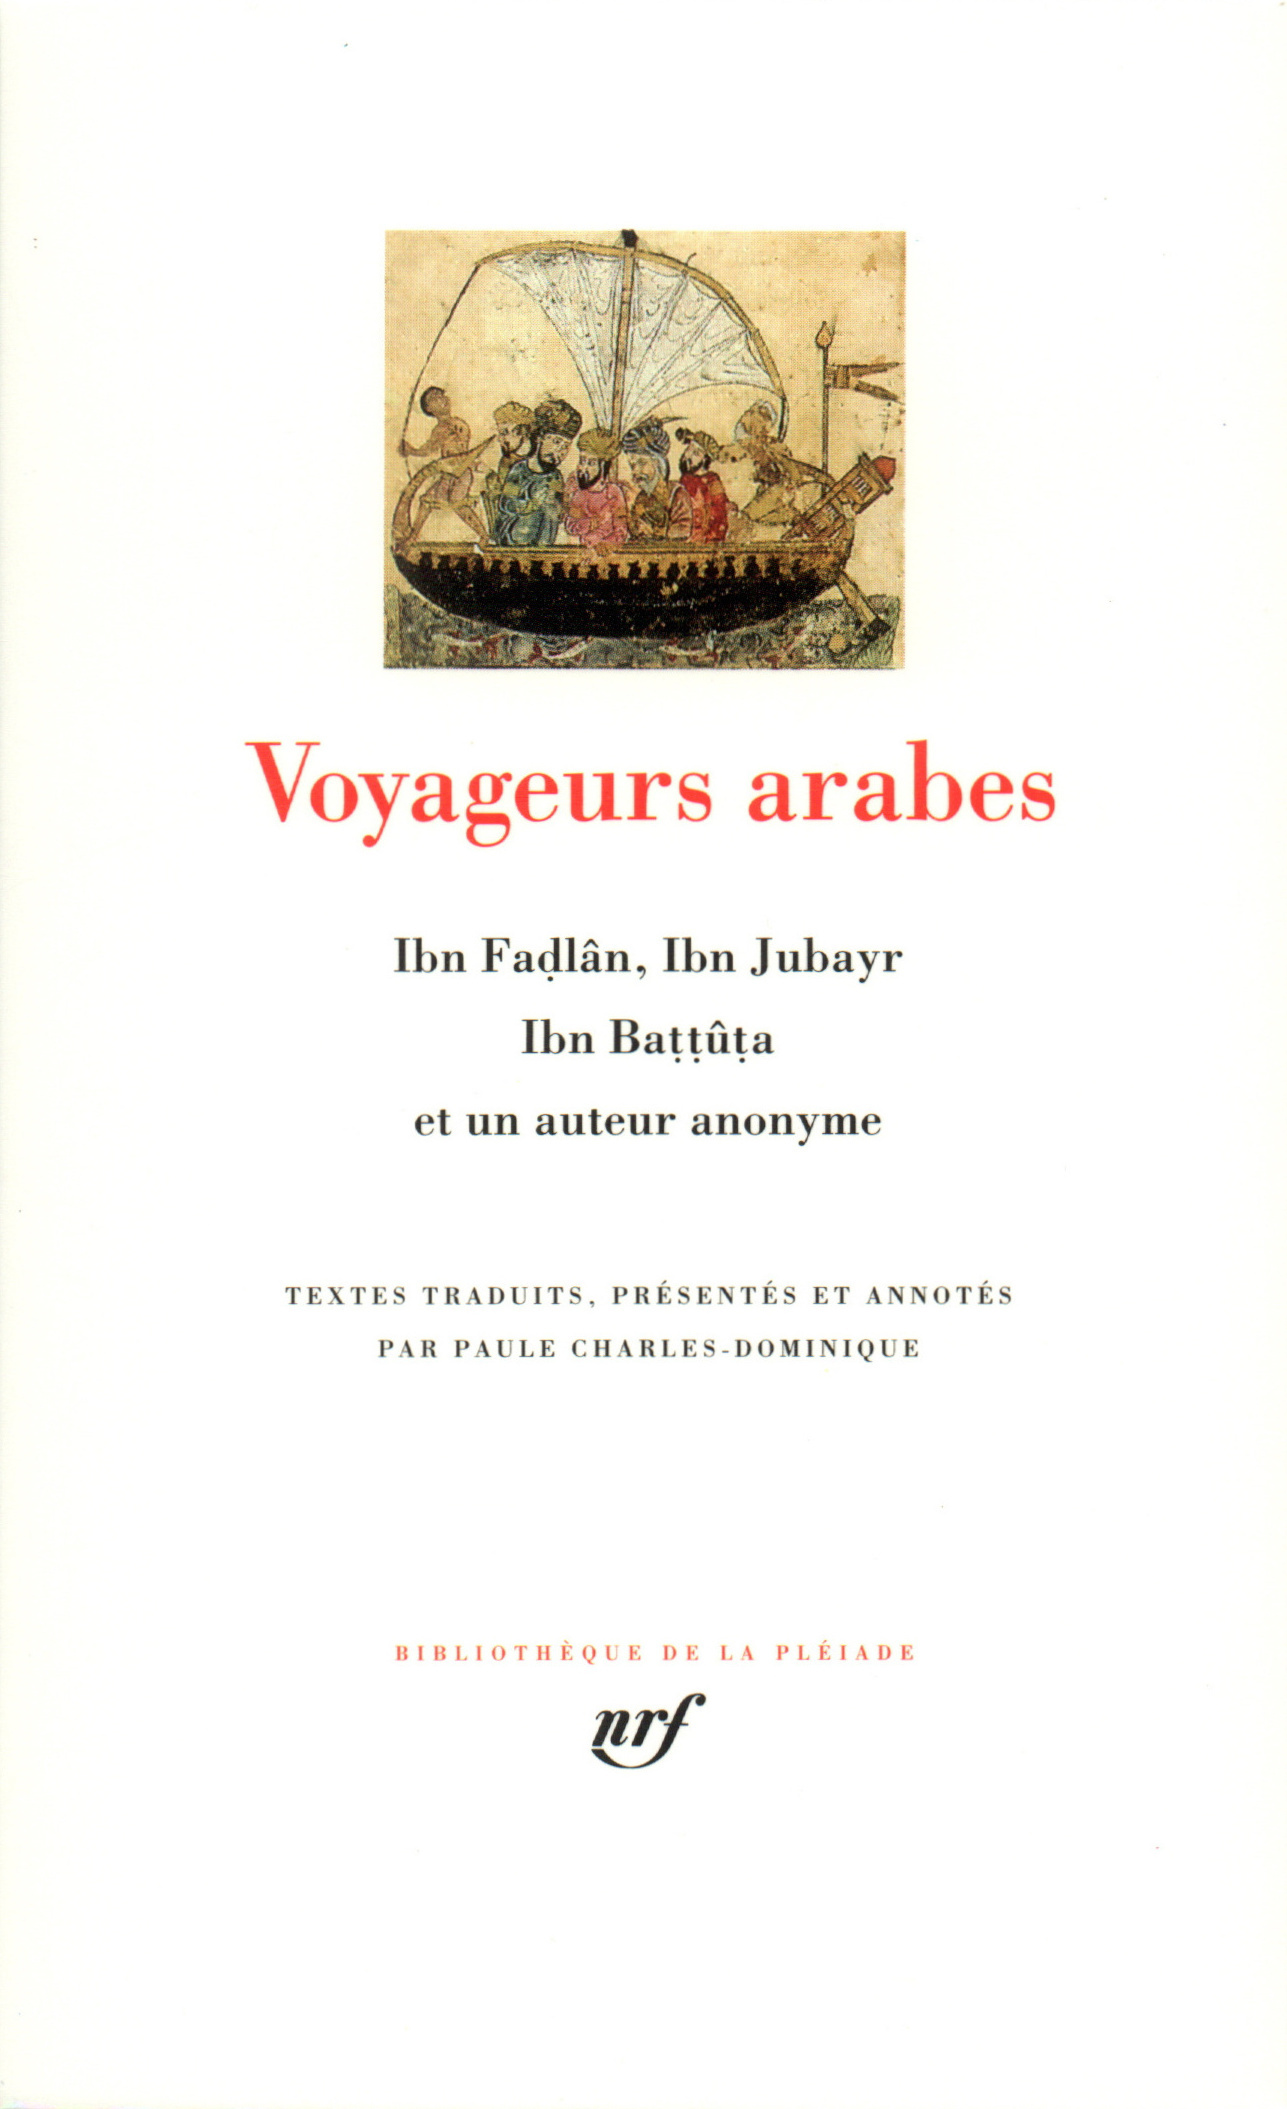 Voyageurs arabes (9782070114696-front-cover)